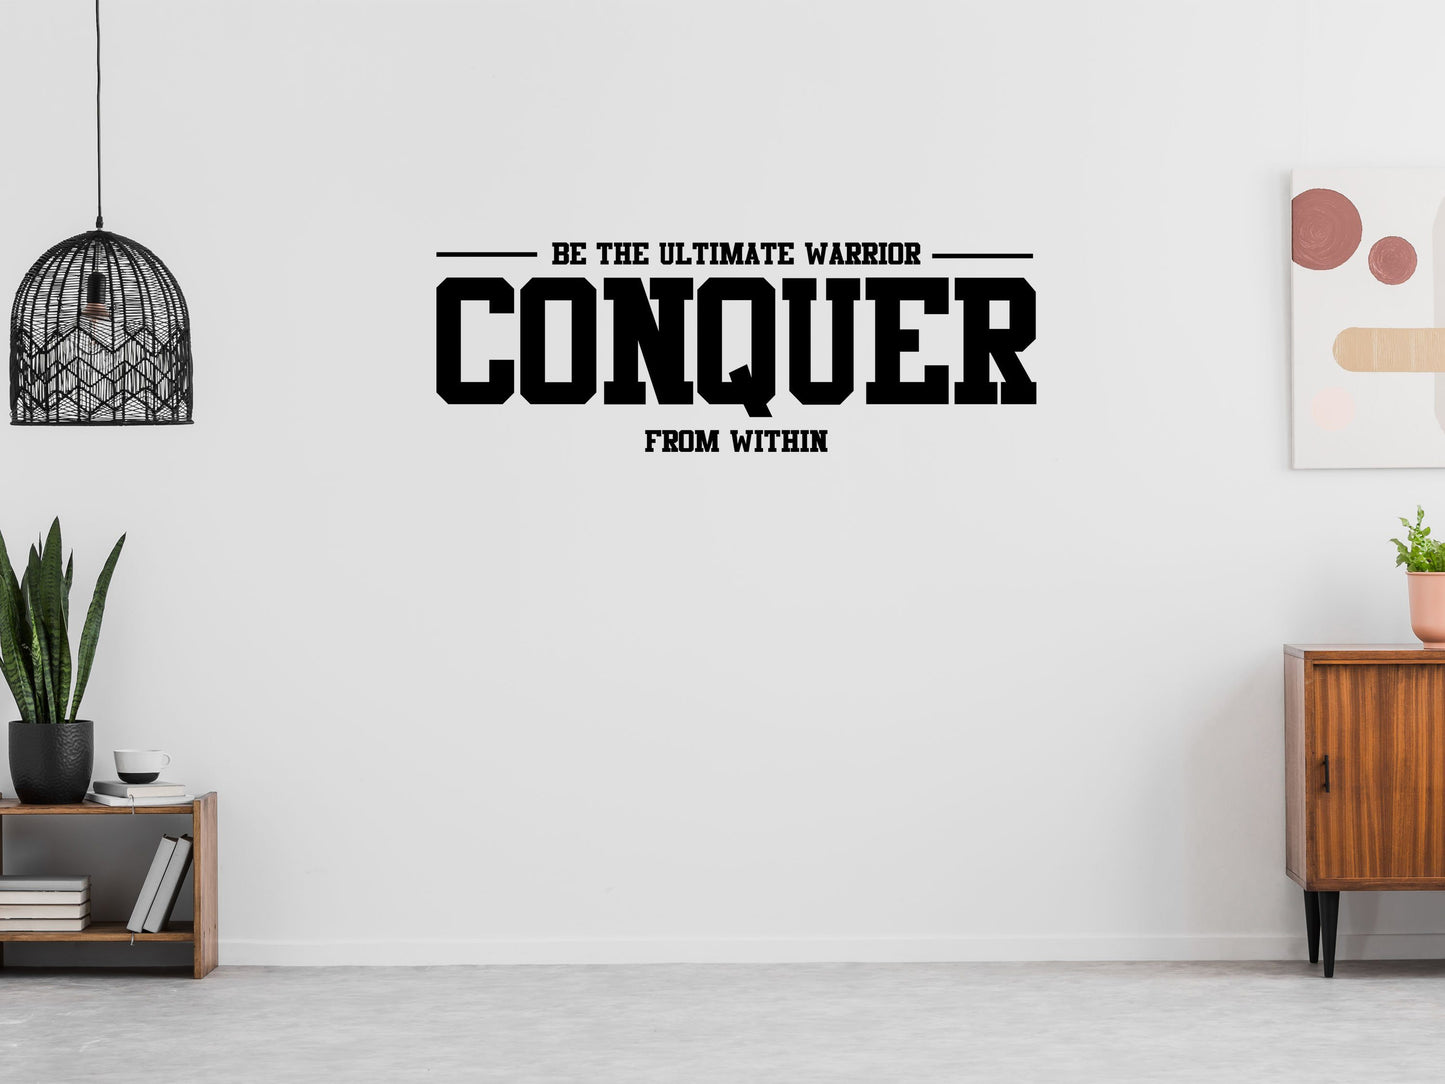 Be The Ultimate Warrior - Warrior Wall Decal - Fitness Room Decor - Conquer From Within - Ultimate Warrior Decal Done 